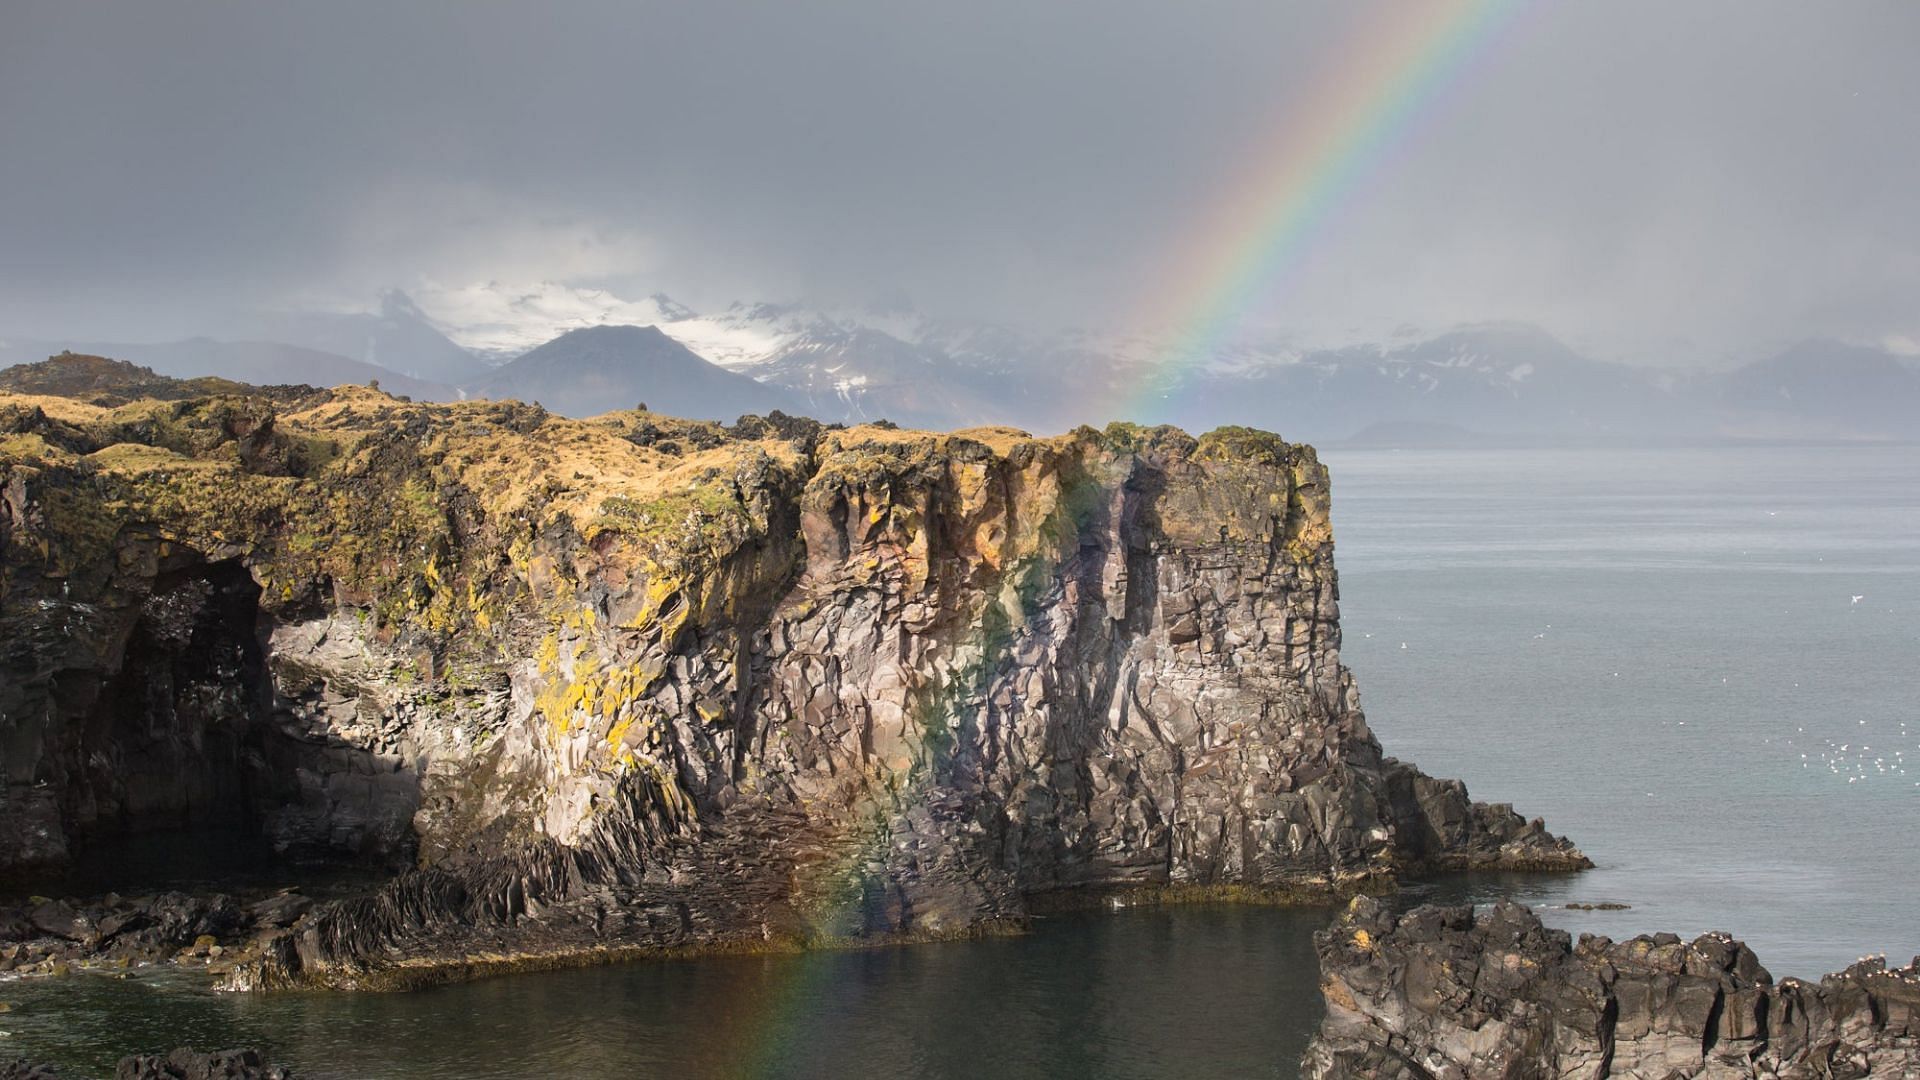 Representative image of a Cliff (Photo by Scott Murdoch from Burst)